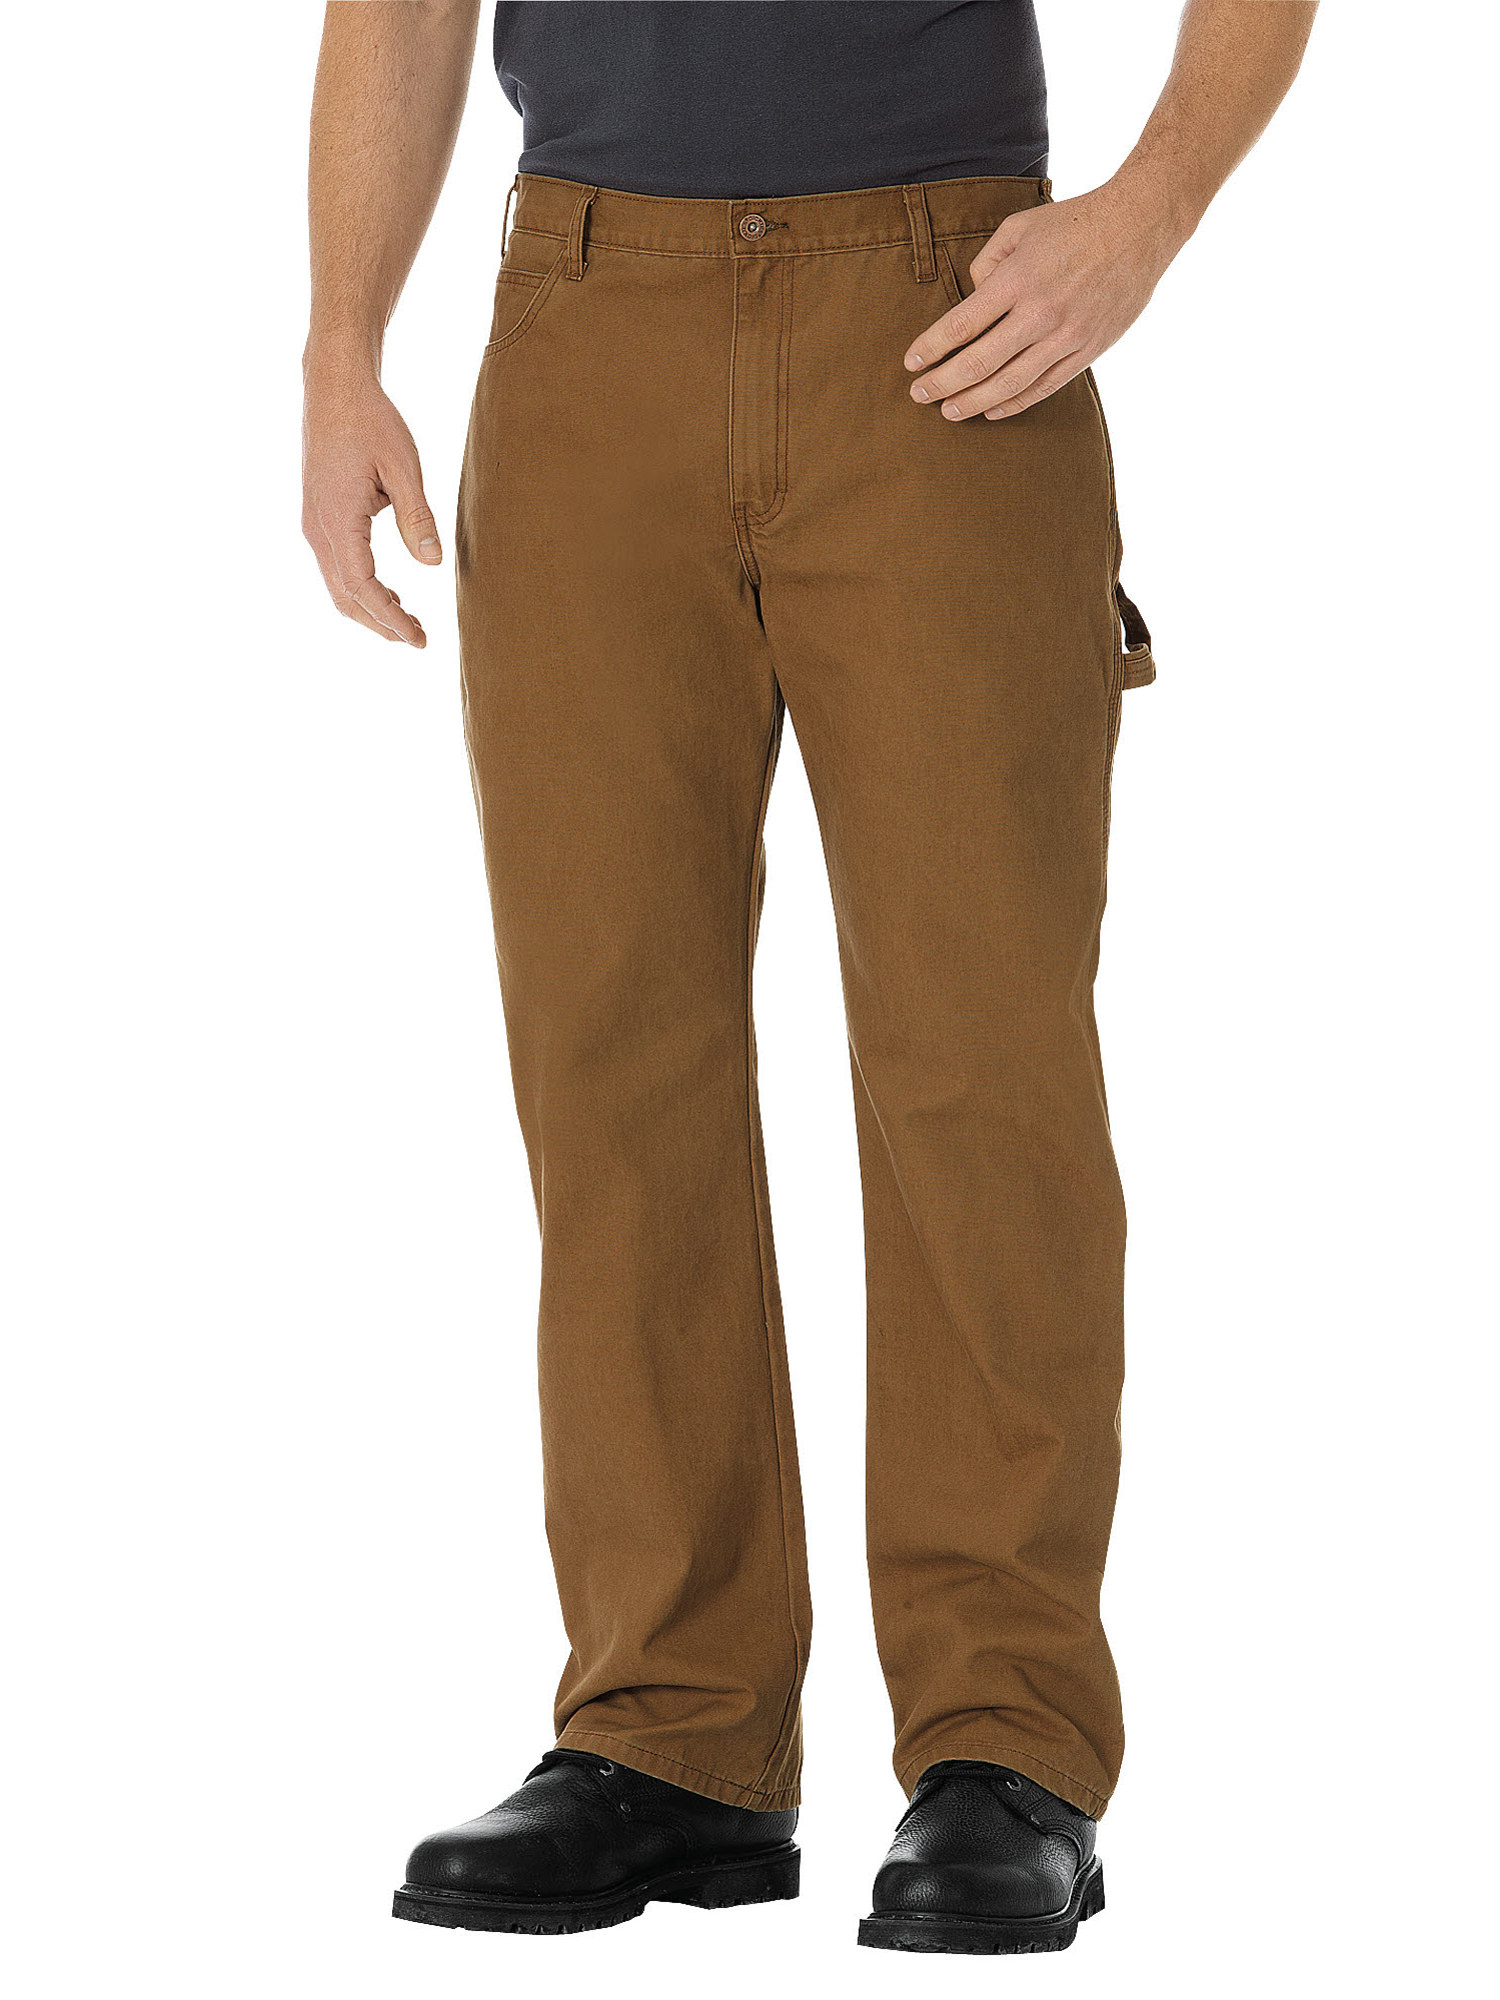 Dickies Mens Relaxed Fit Straight Leg Carpenter Duck Jeans - image 1 of 2